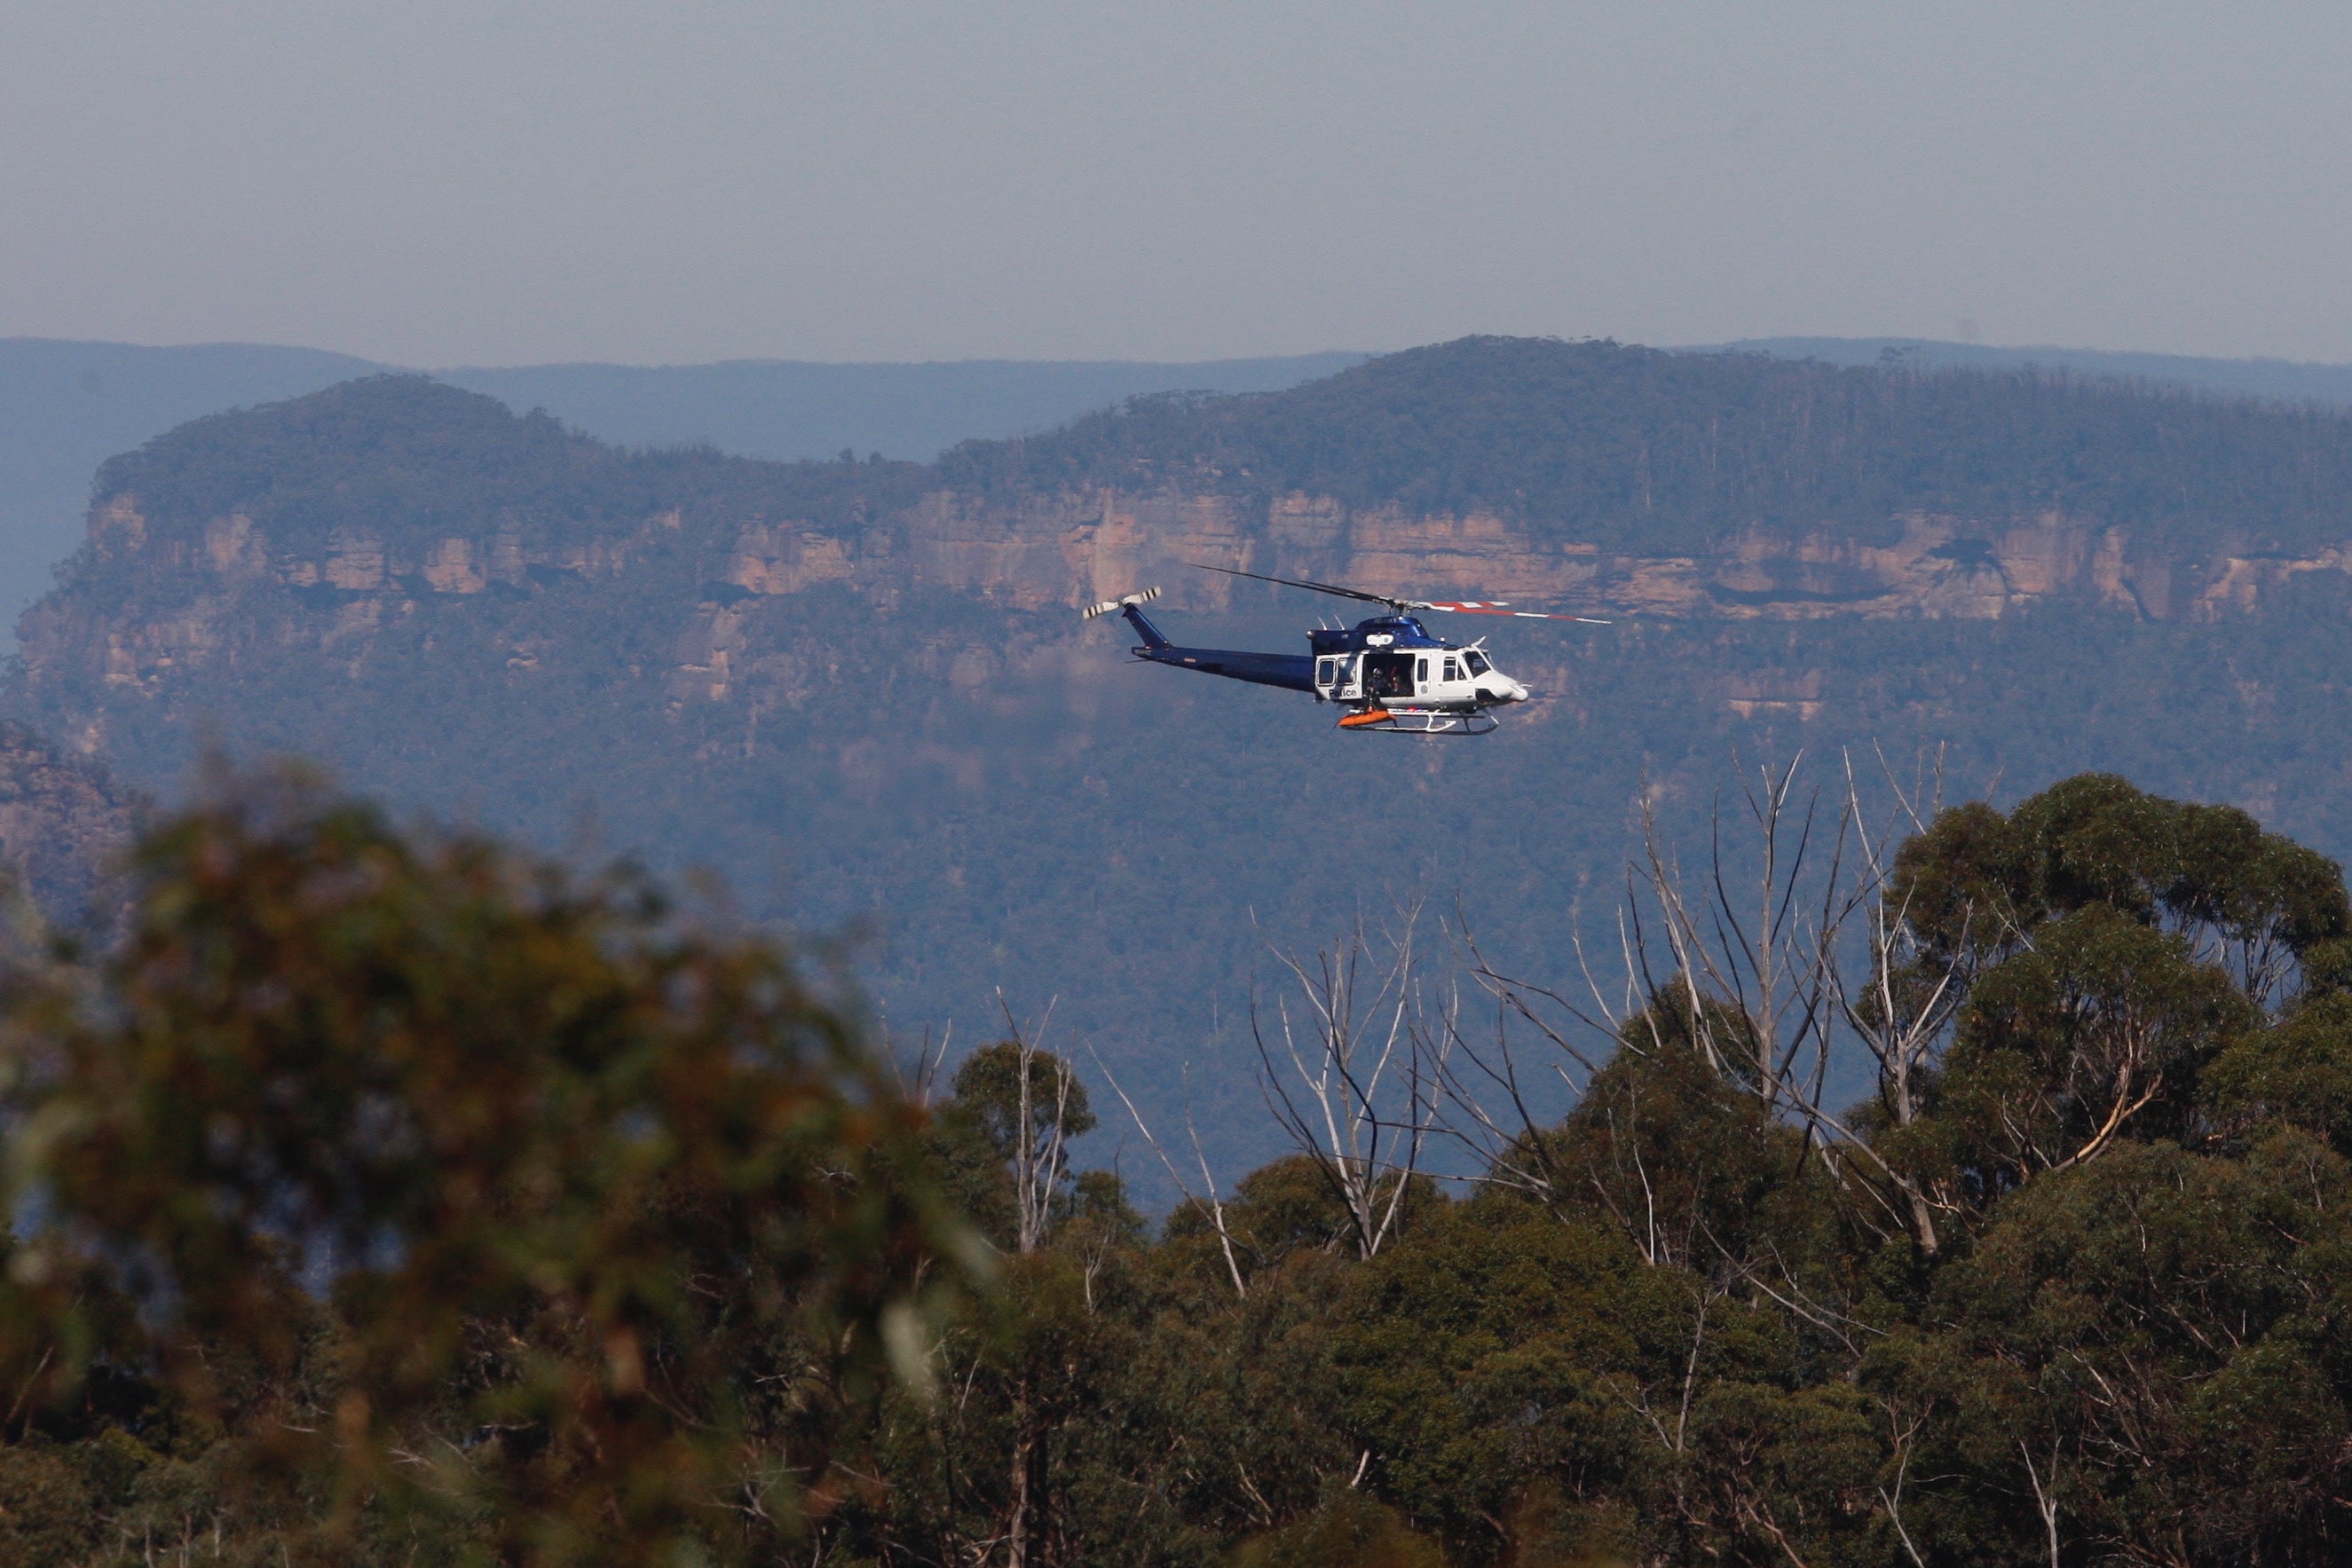 A helicopter recovers the bodies at Wentworth Falls in the Blue Mountains, Australia, on Tuesday